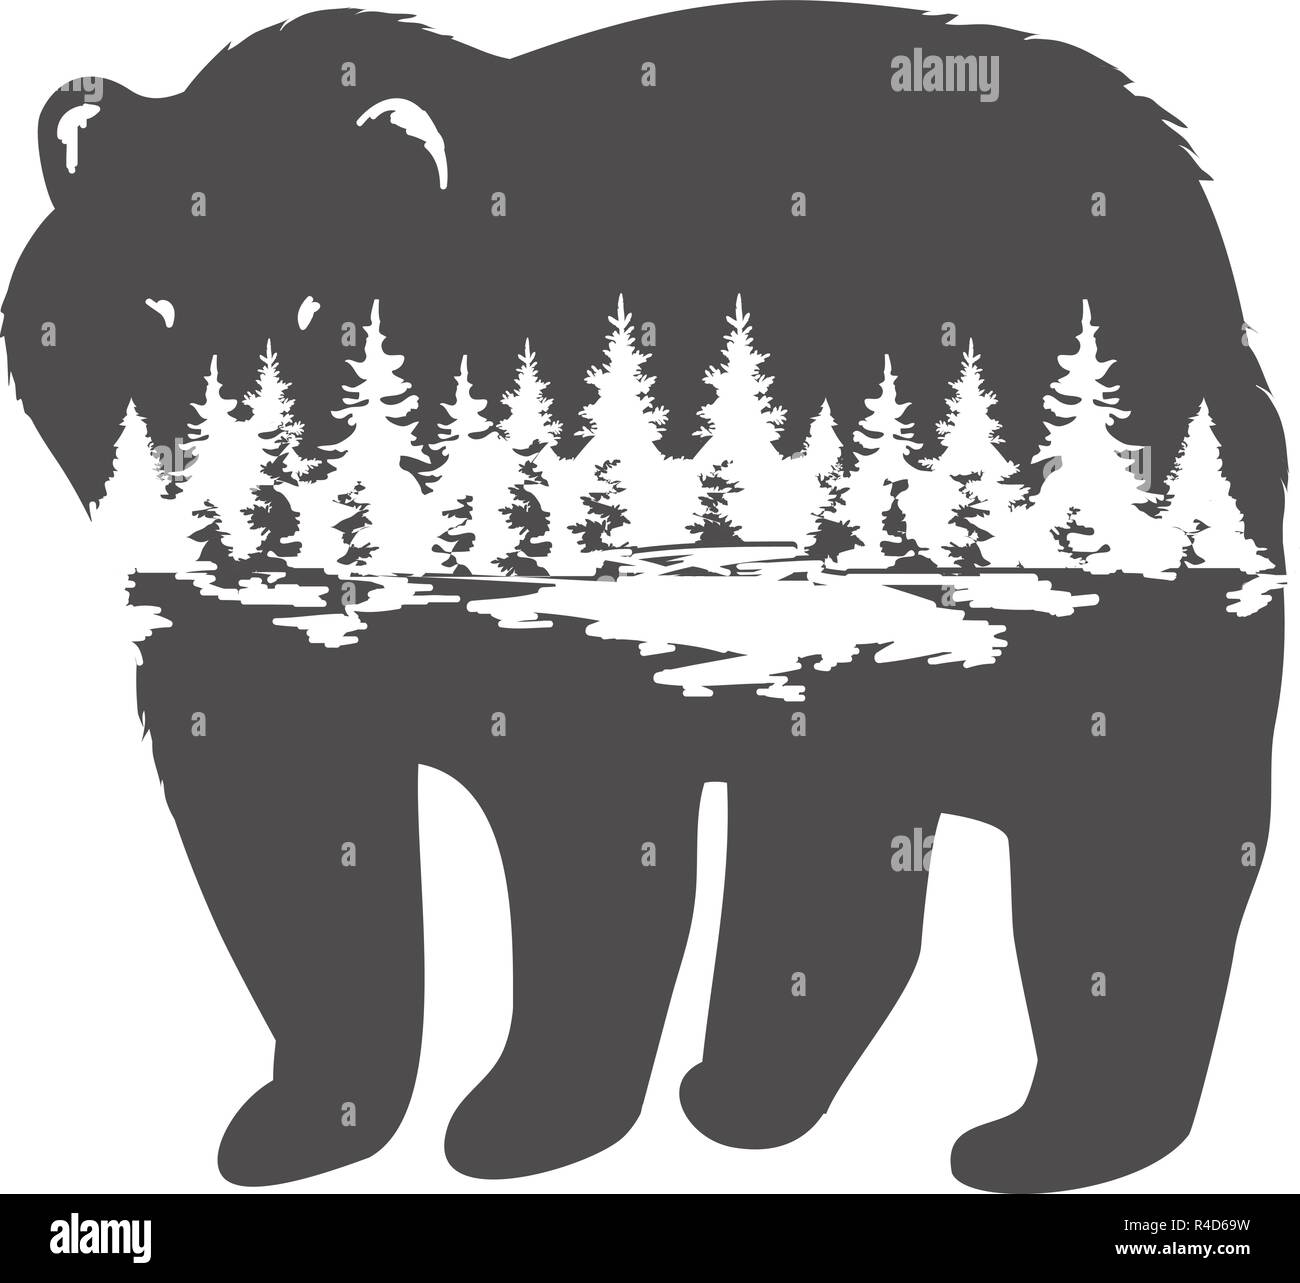 vector illustration of a bear silhouette with forest. abstract nature background. Stock Vector